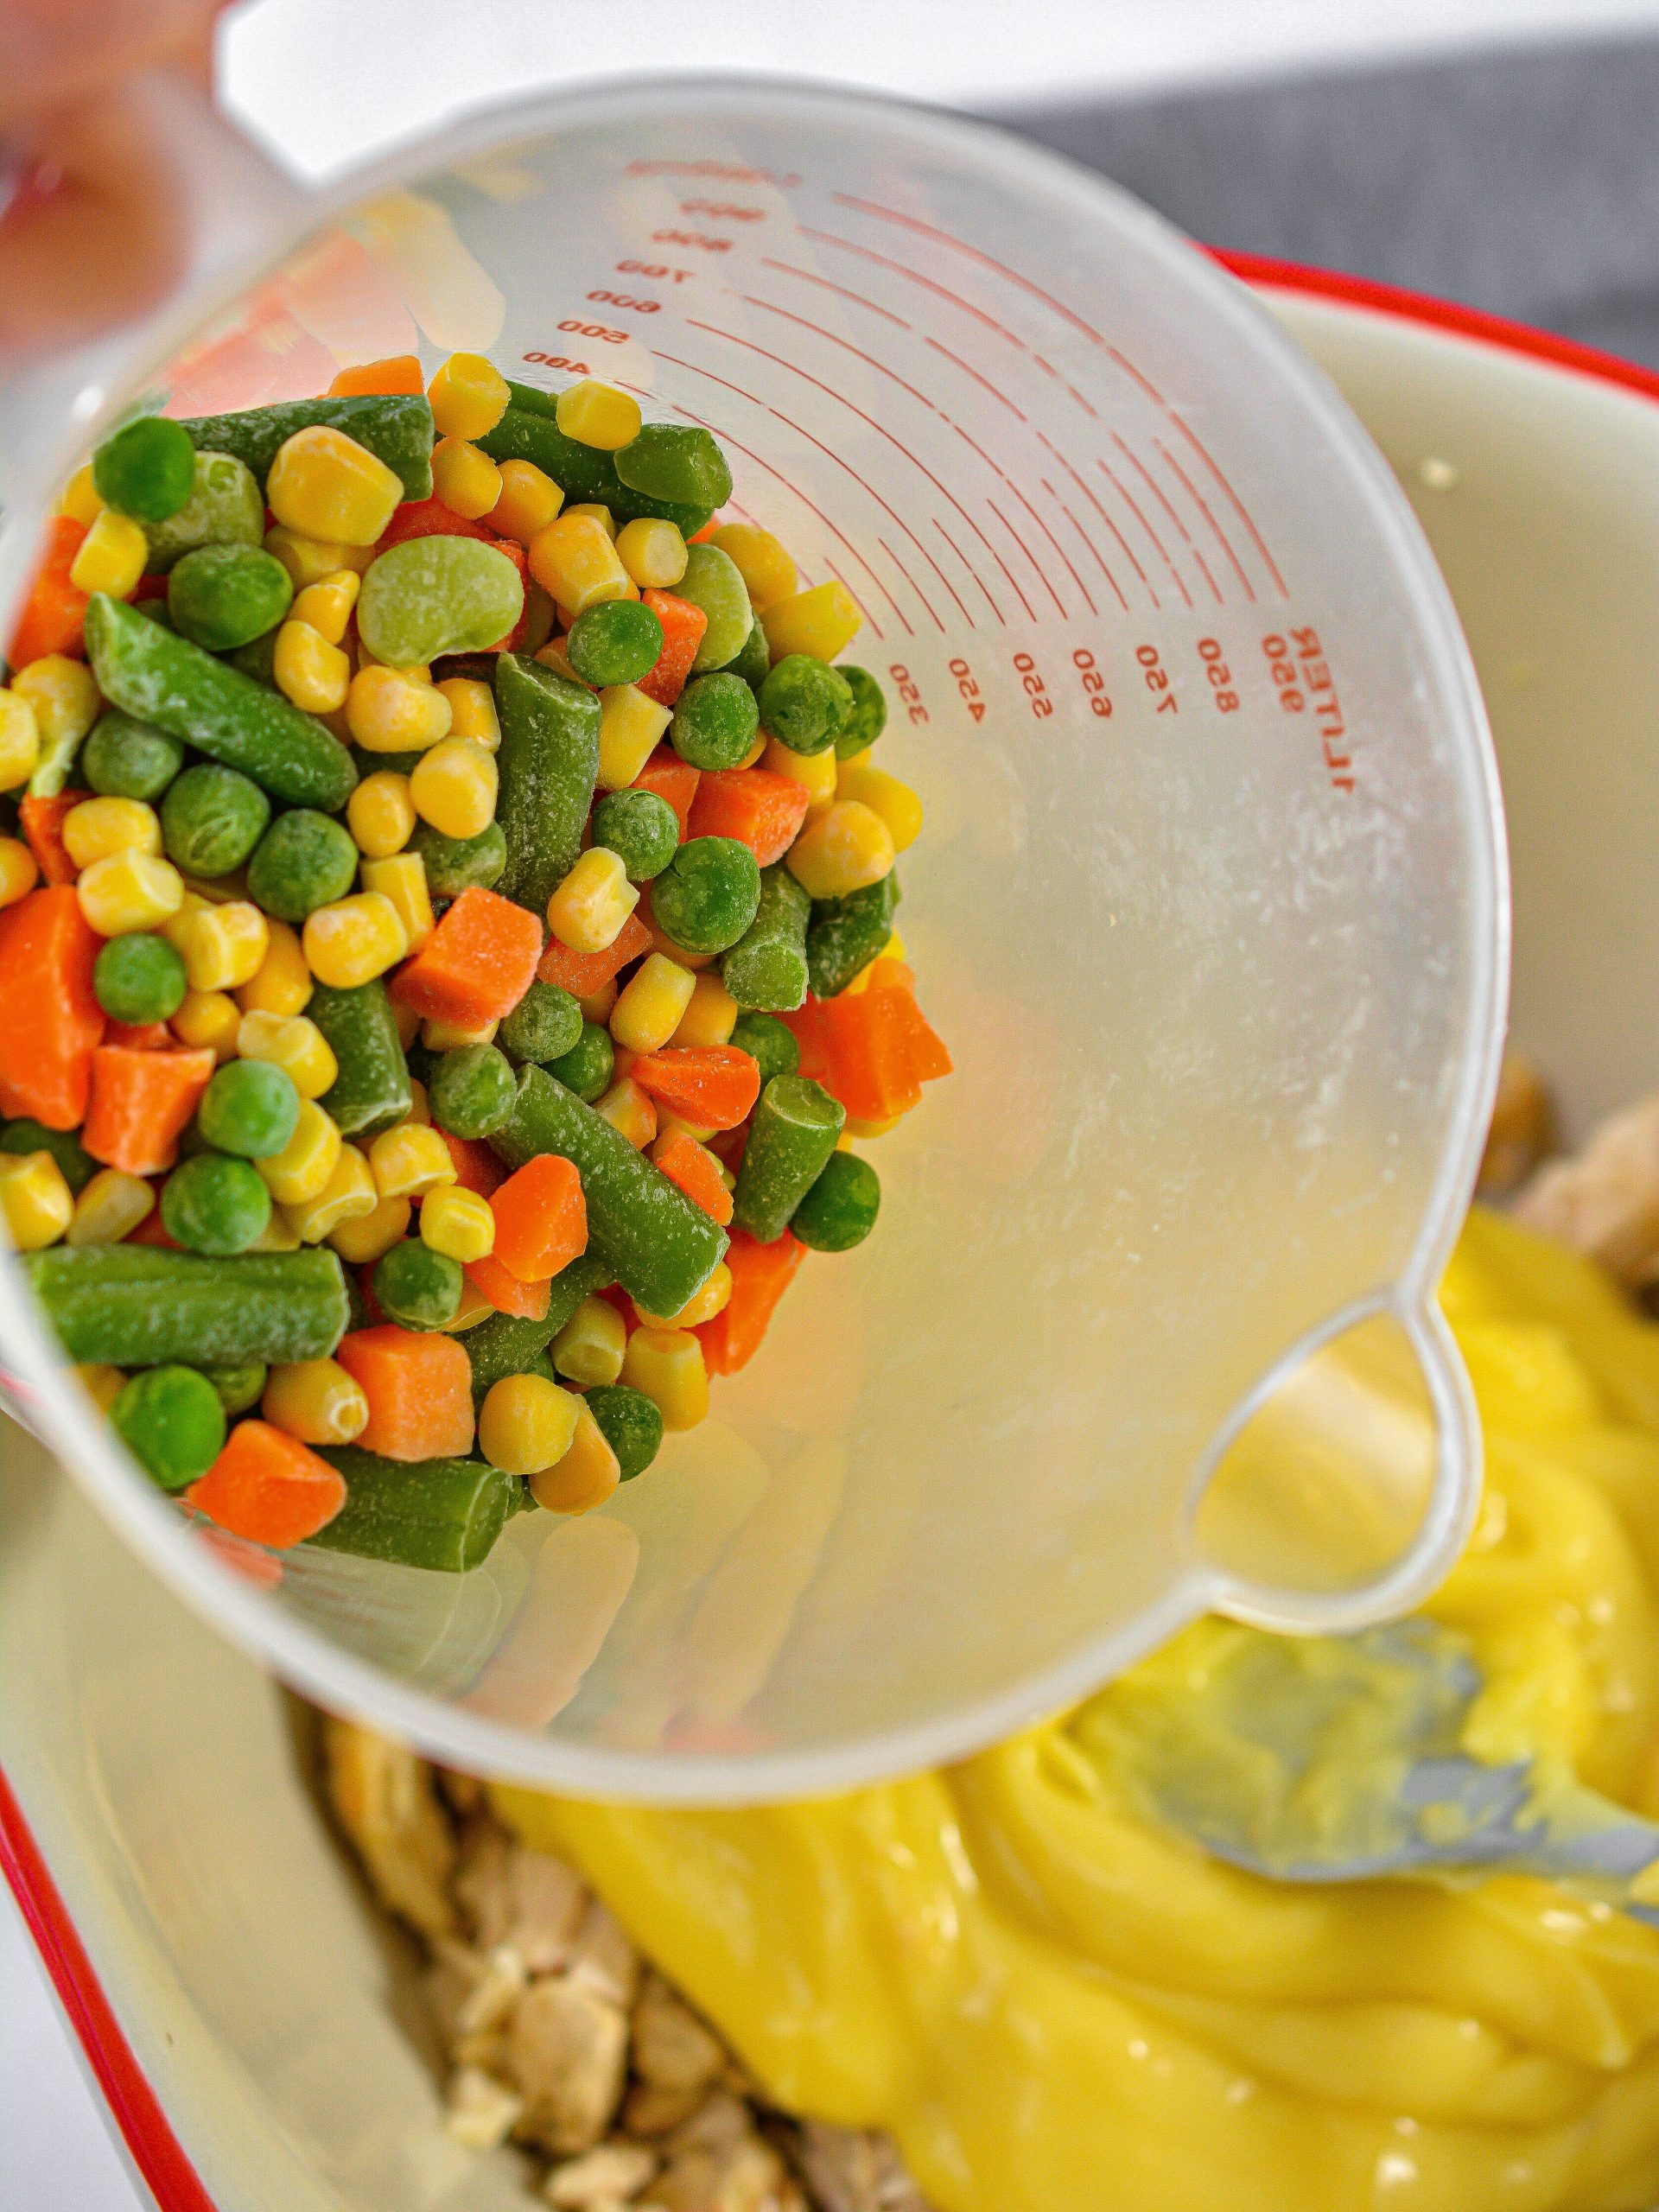 add 2 cups of frozen mixed vegetables.